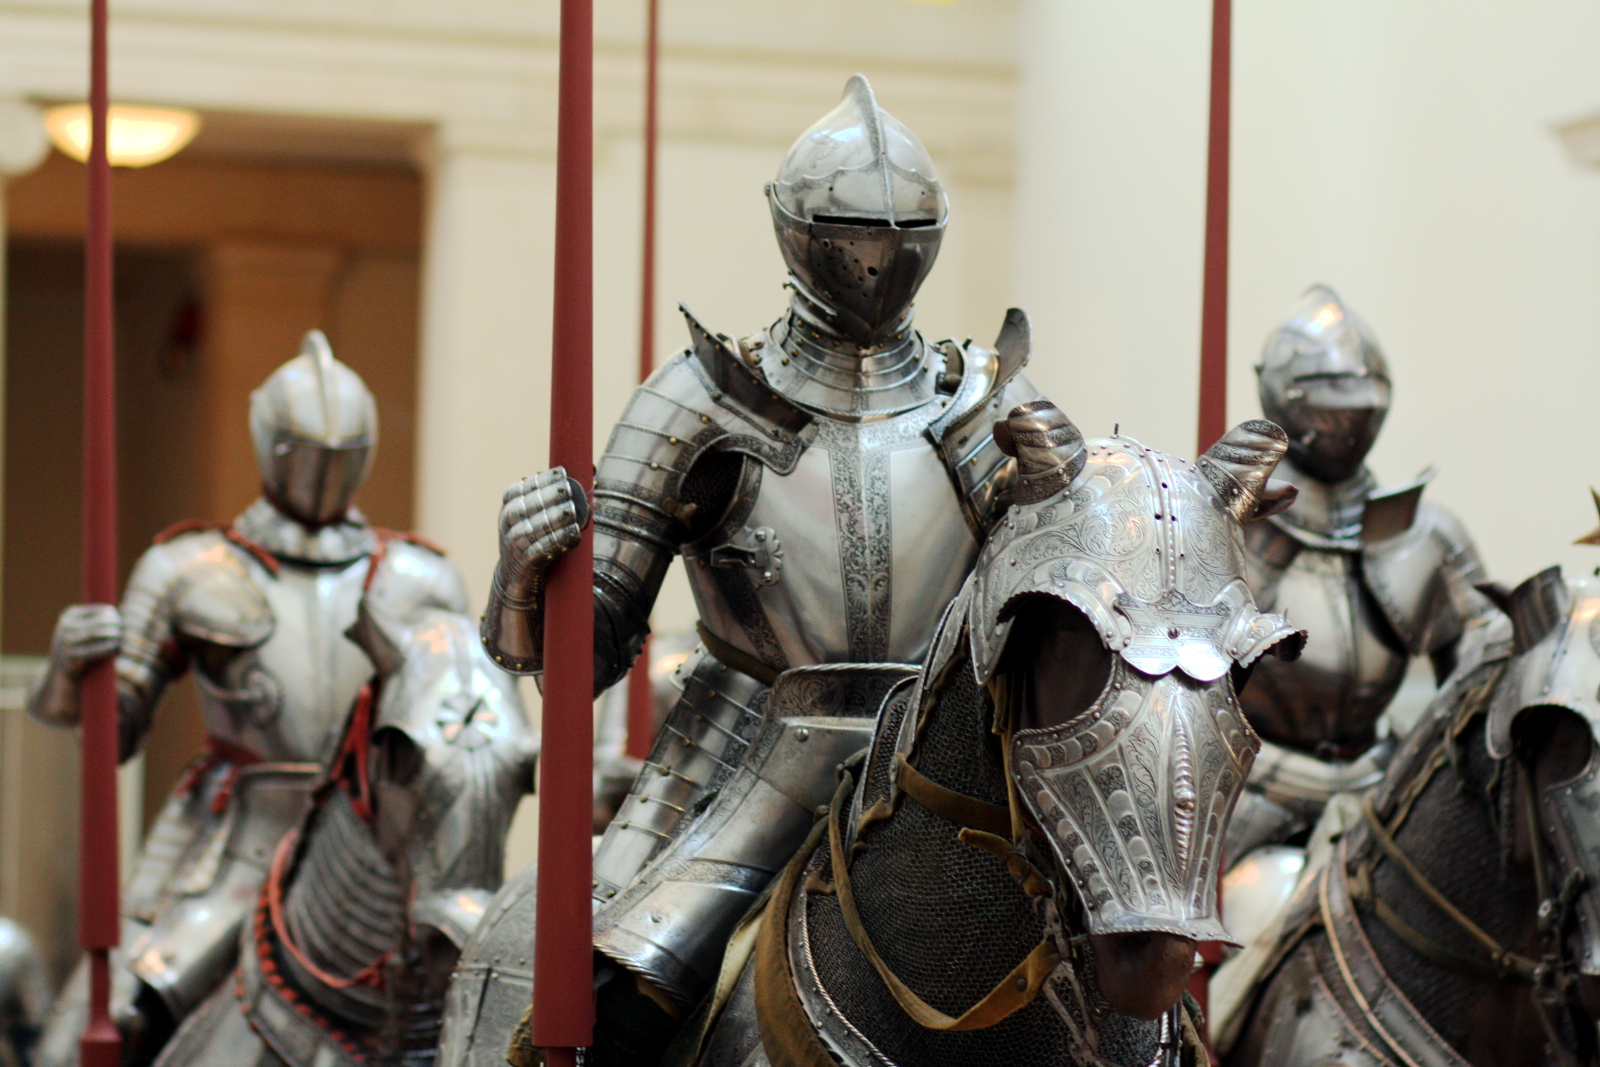 there are many suit of armor on display